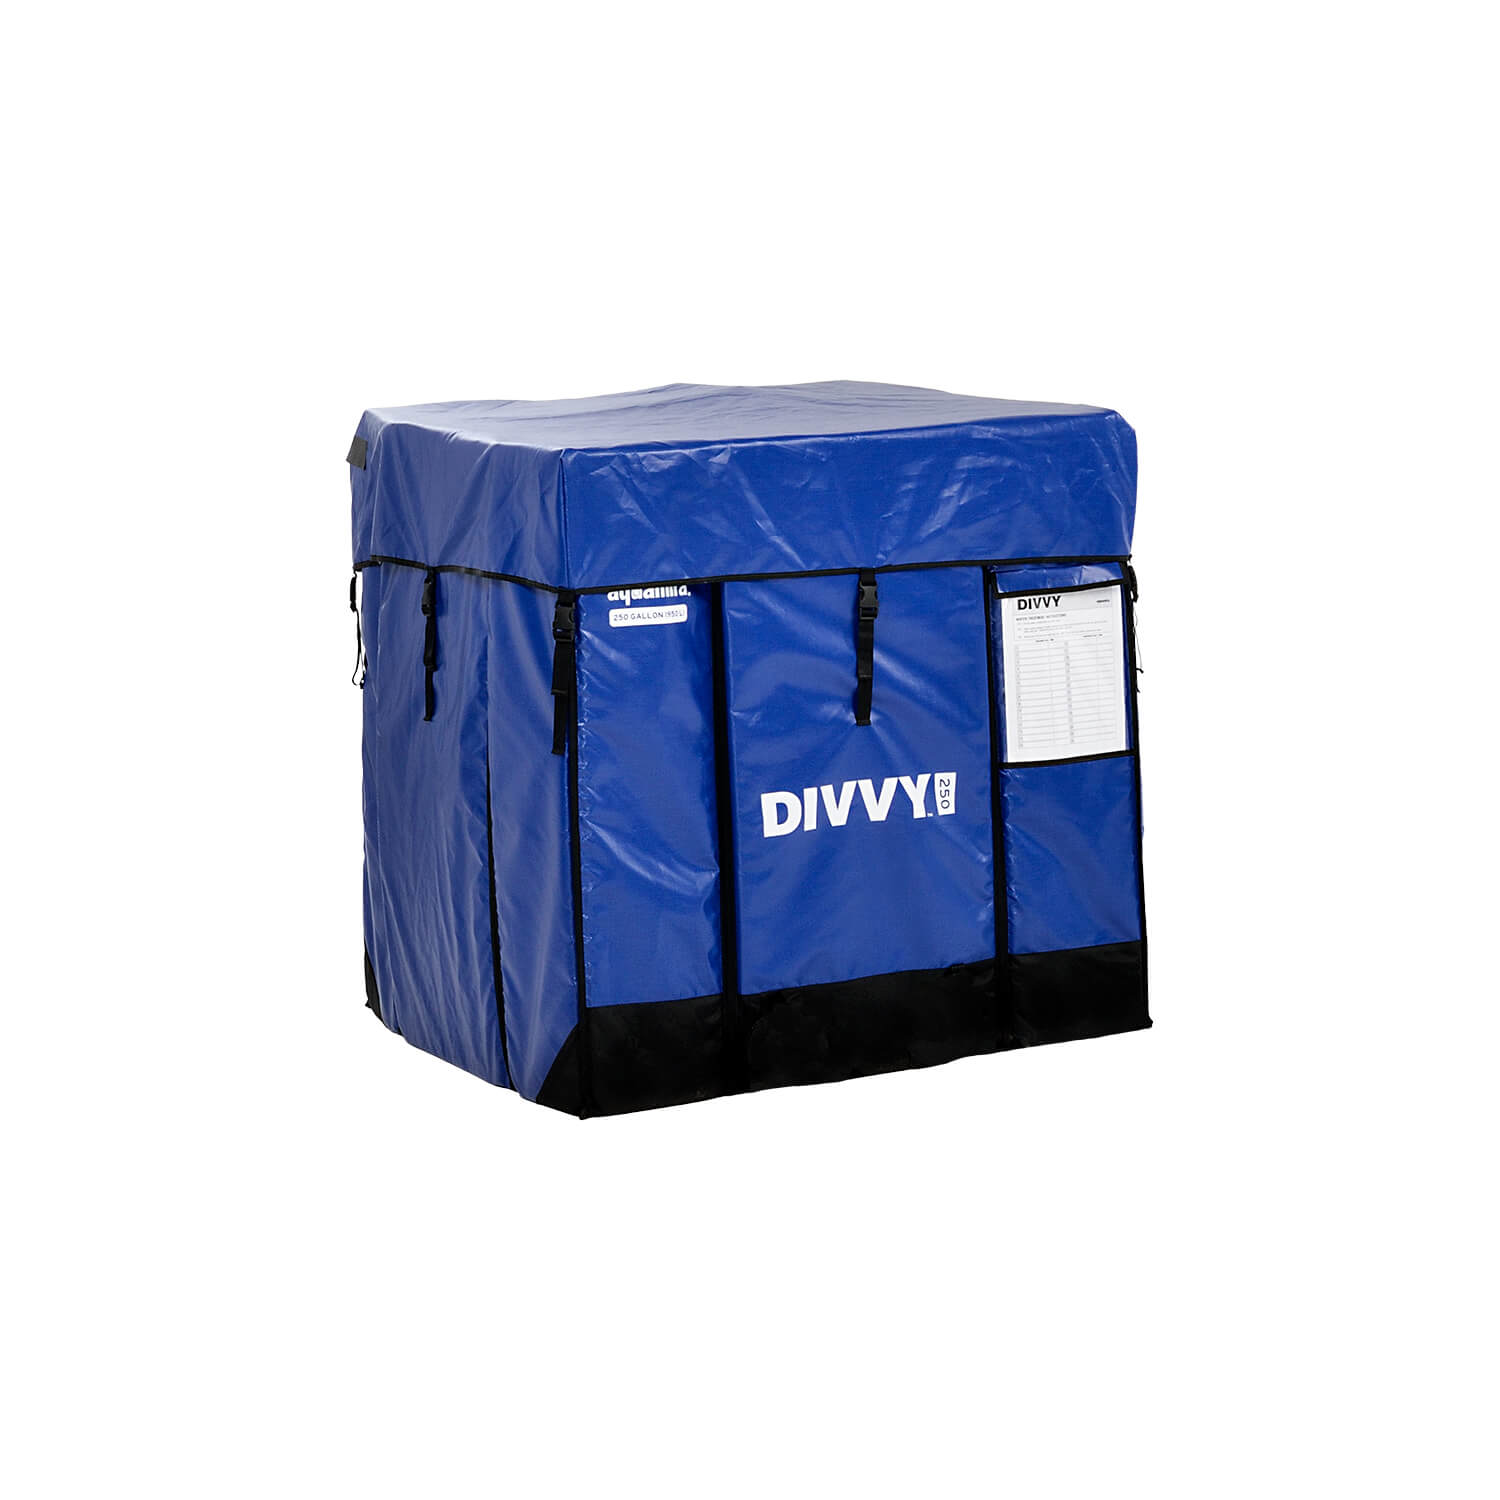 A blue box with the word Aquamira Divvy 750 Emergency Water Filtration System on it.